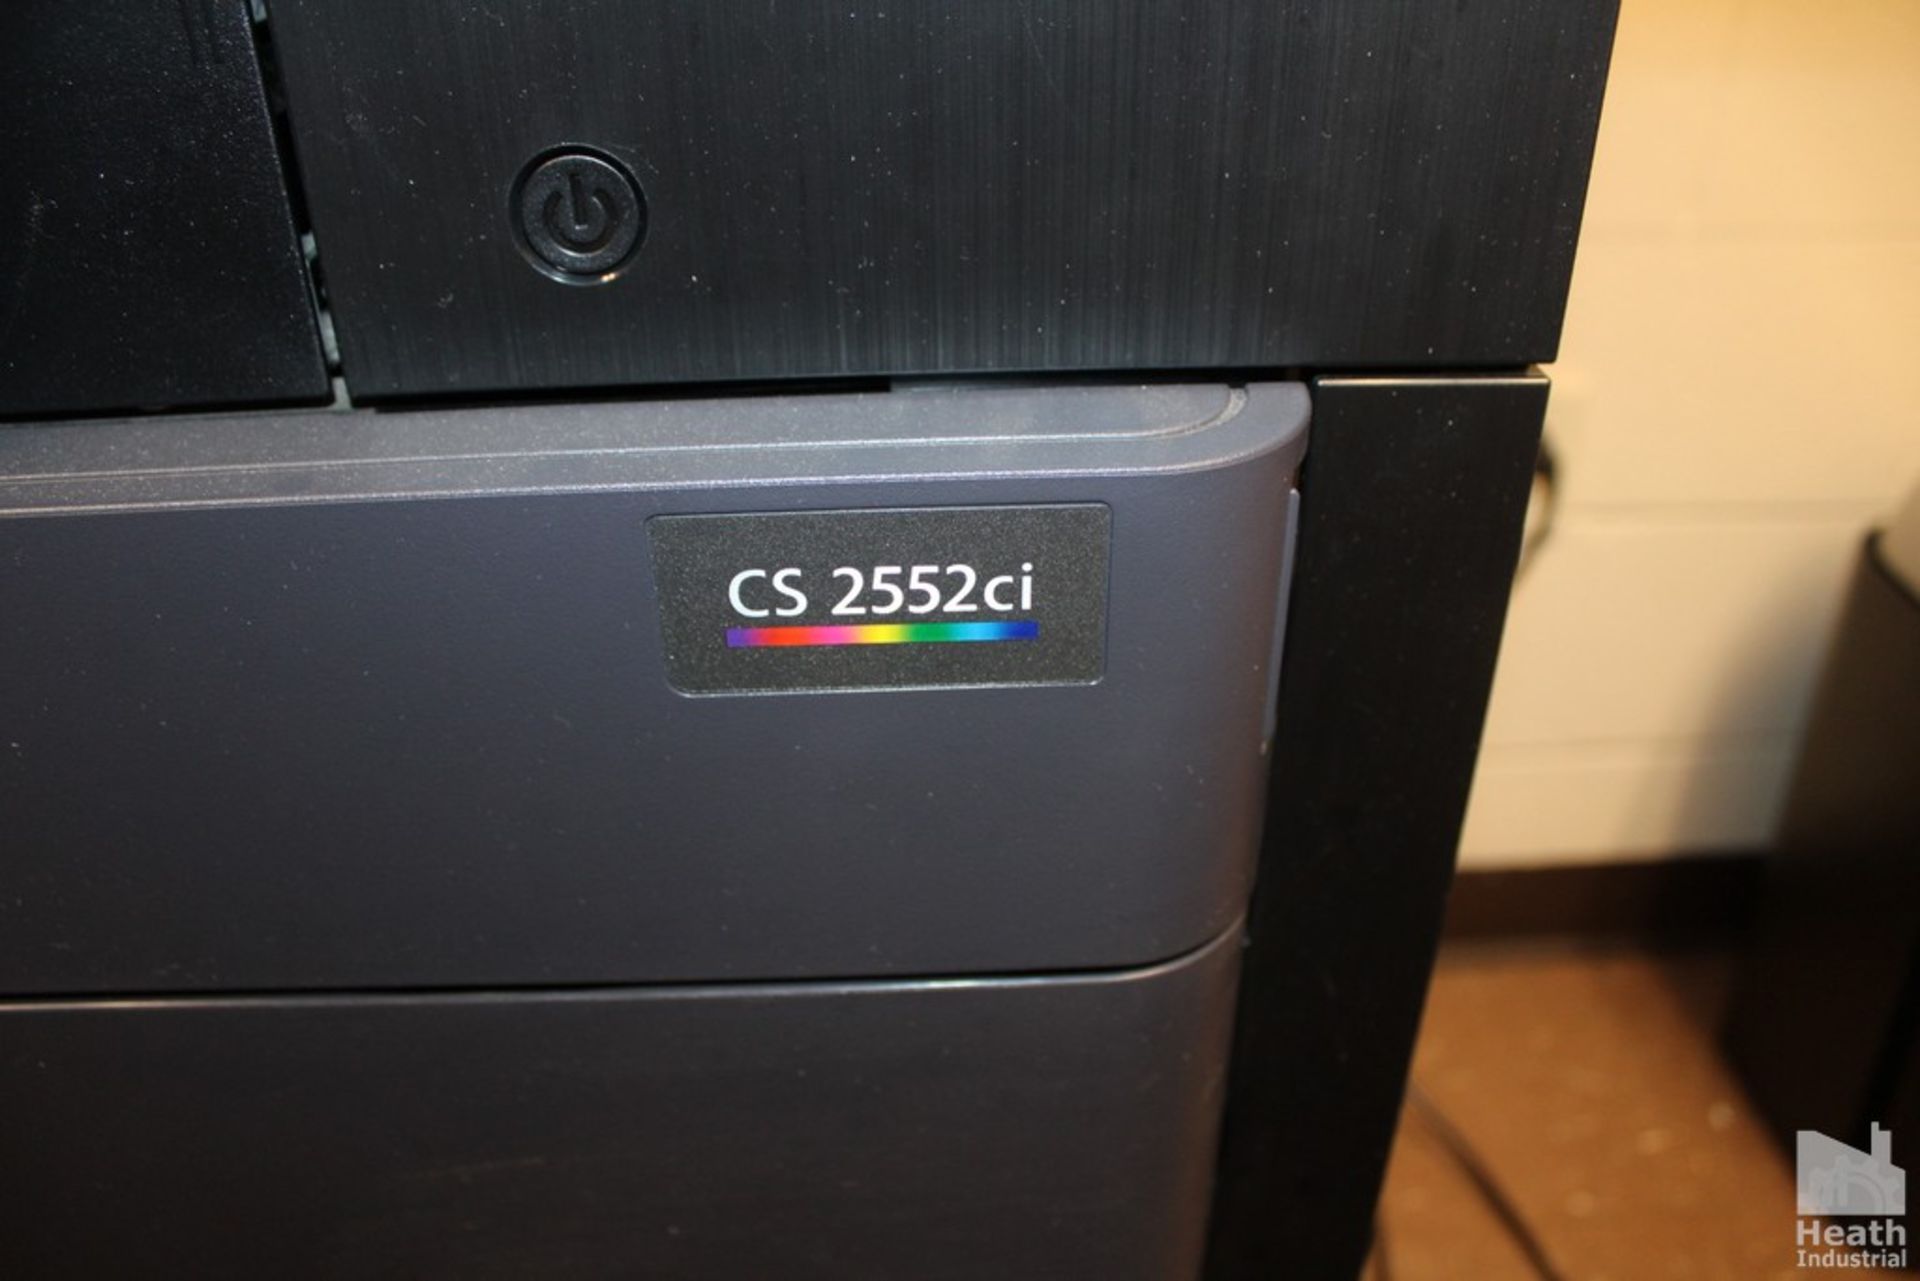 COPYSTAR MODEL CS2552CI COLOR COPIER WITH FOUR DRAWERS, 261,023 IMAGE COUNT - Image 4 of 4